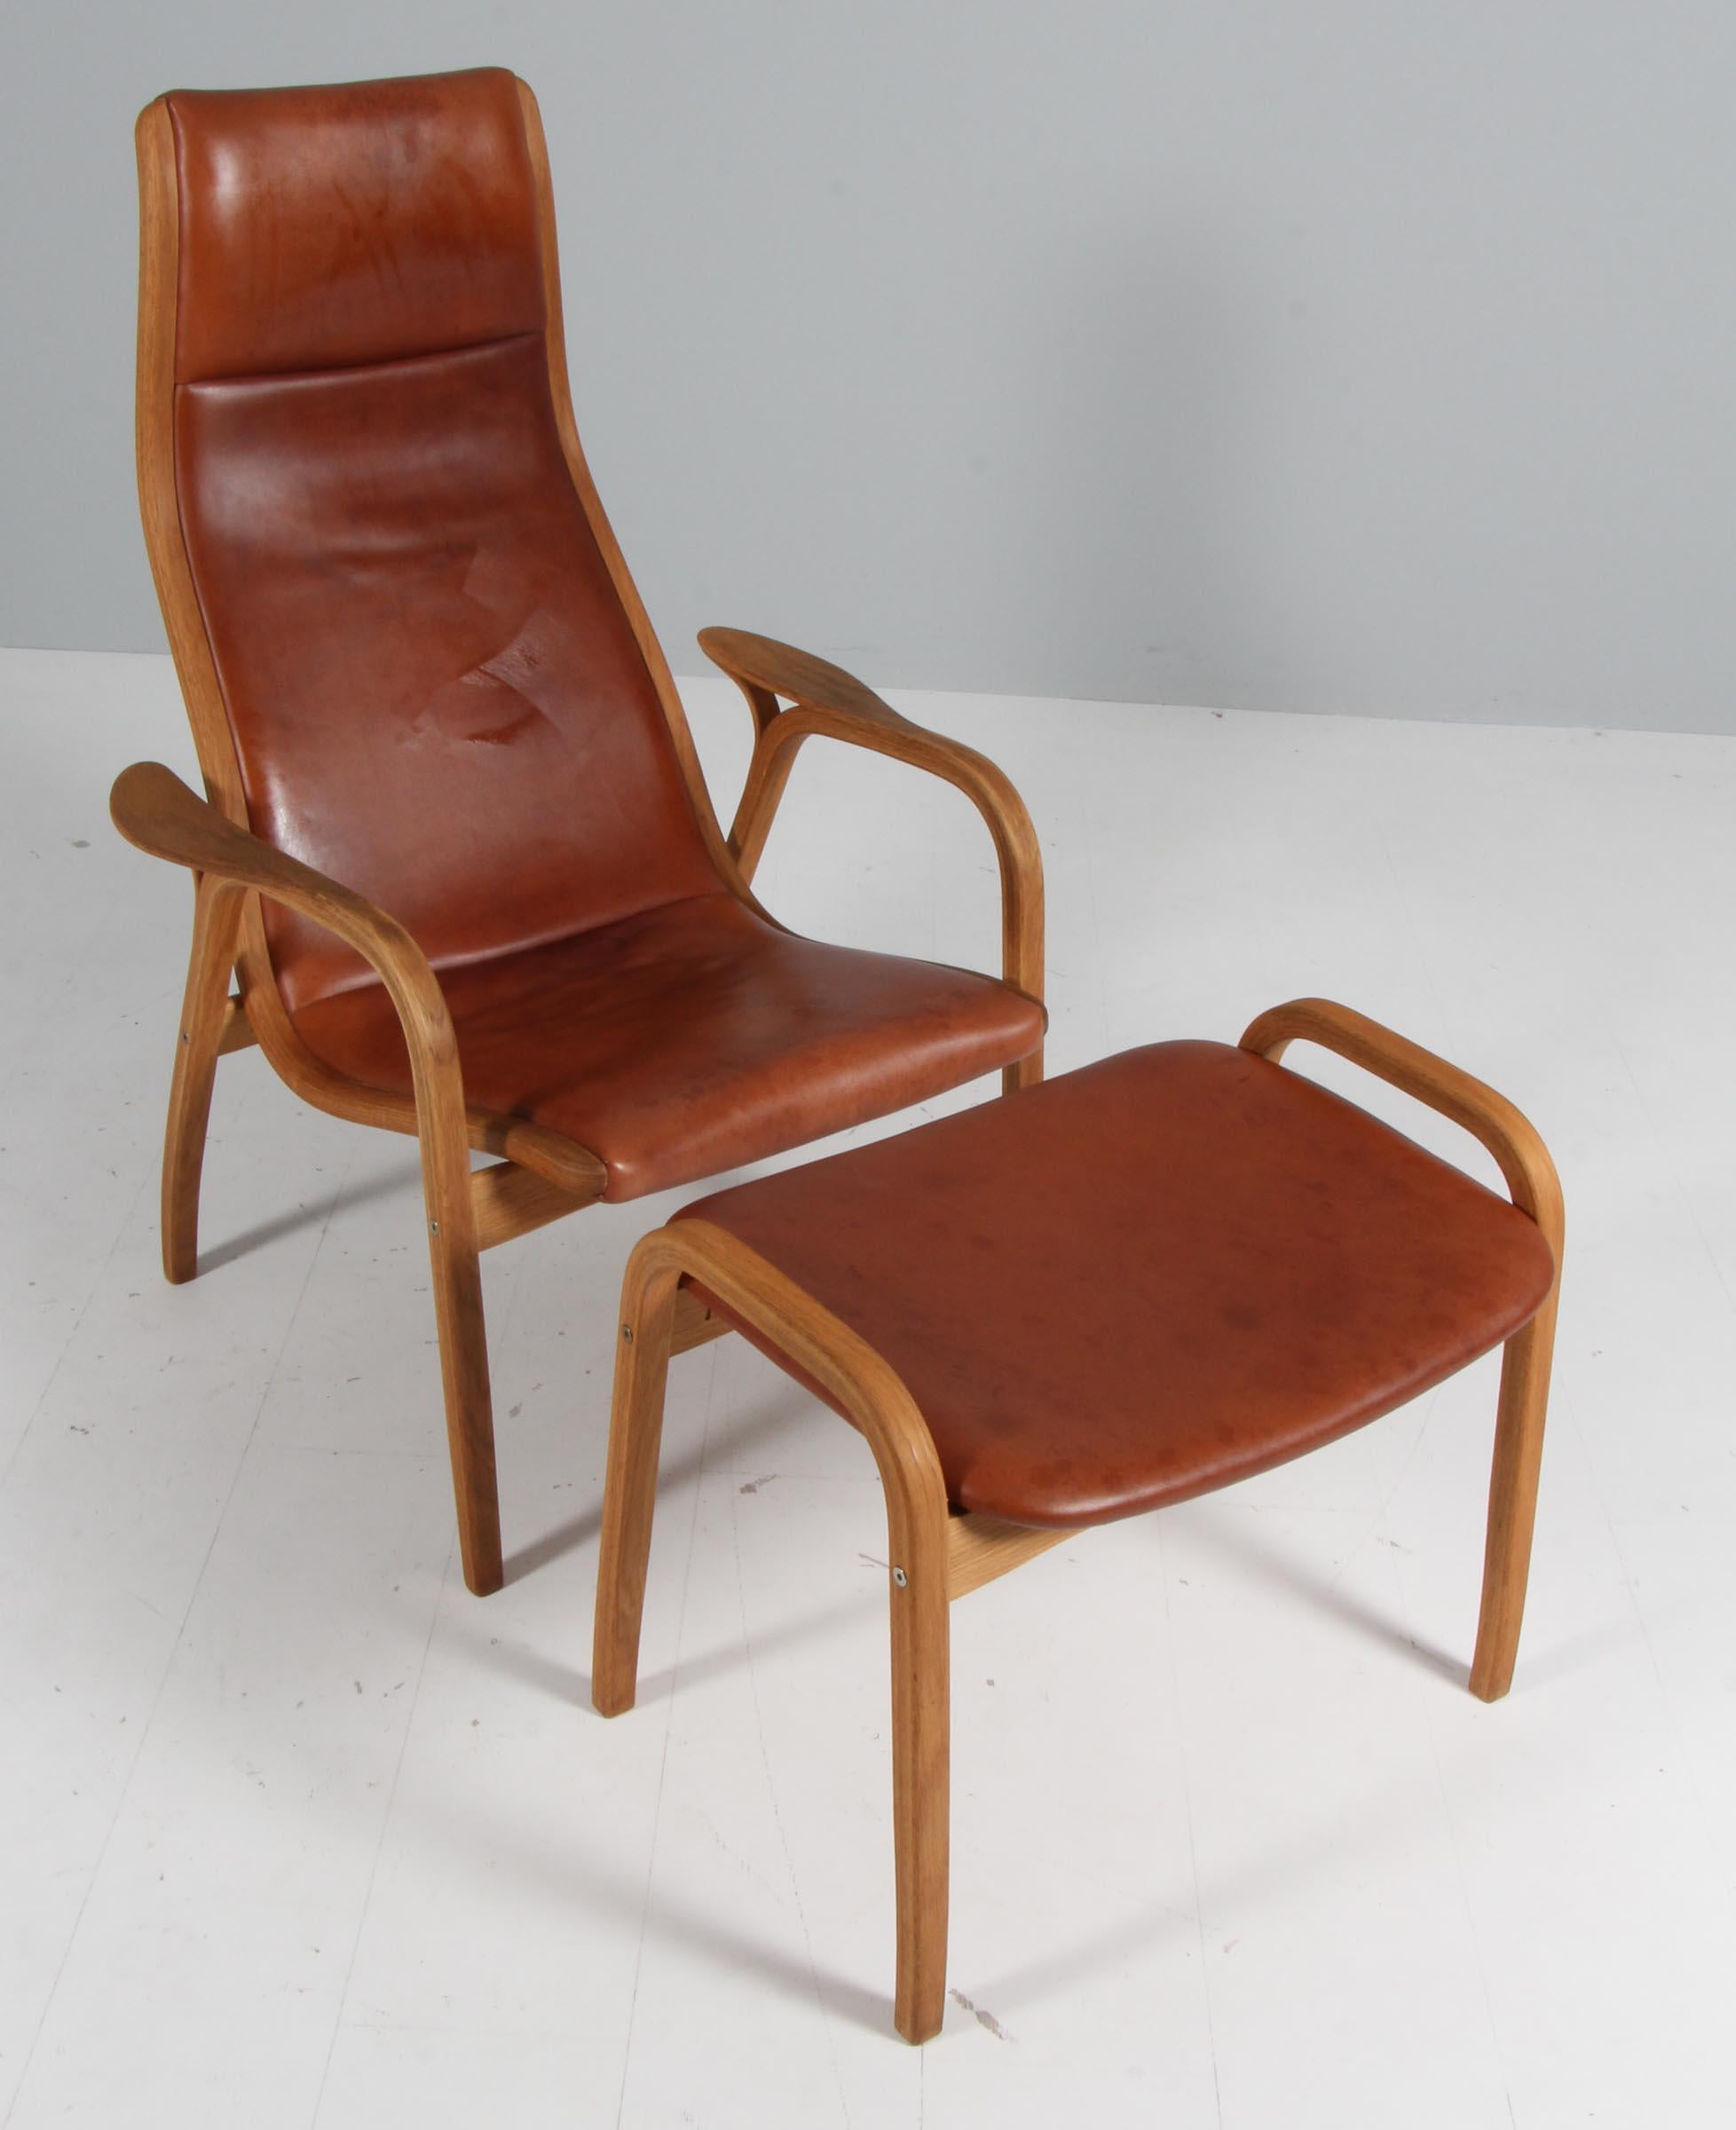 Yngve Ekström lounge chair with ottoman, frame of oak

Original patinated leather.

Model Lamino, made by Swedese.